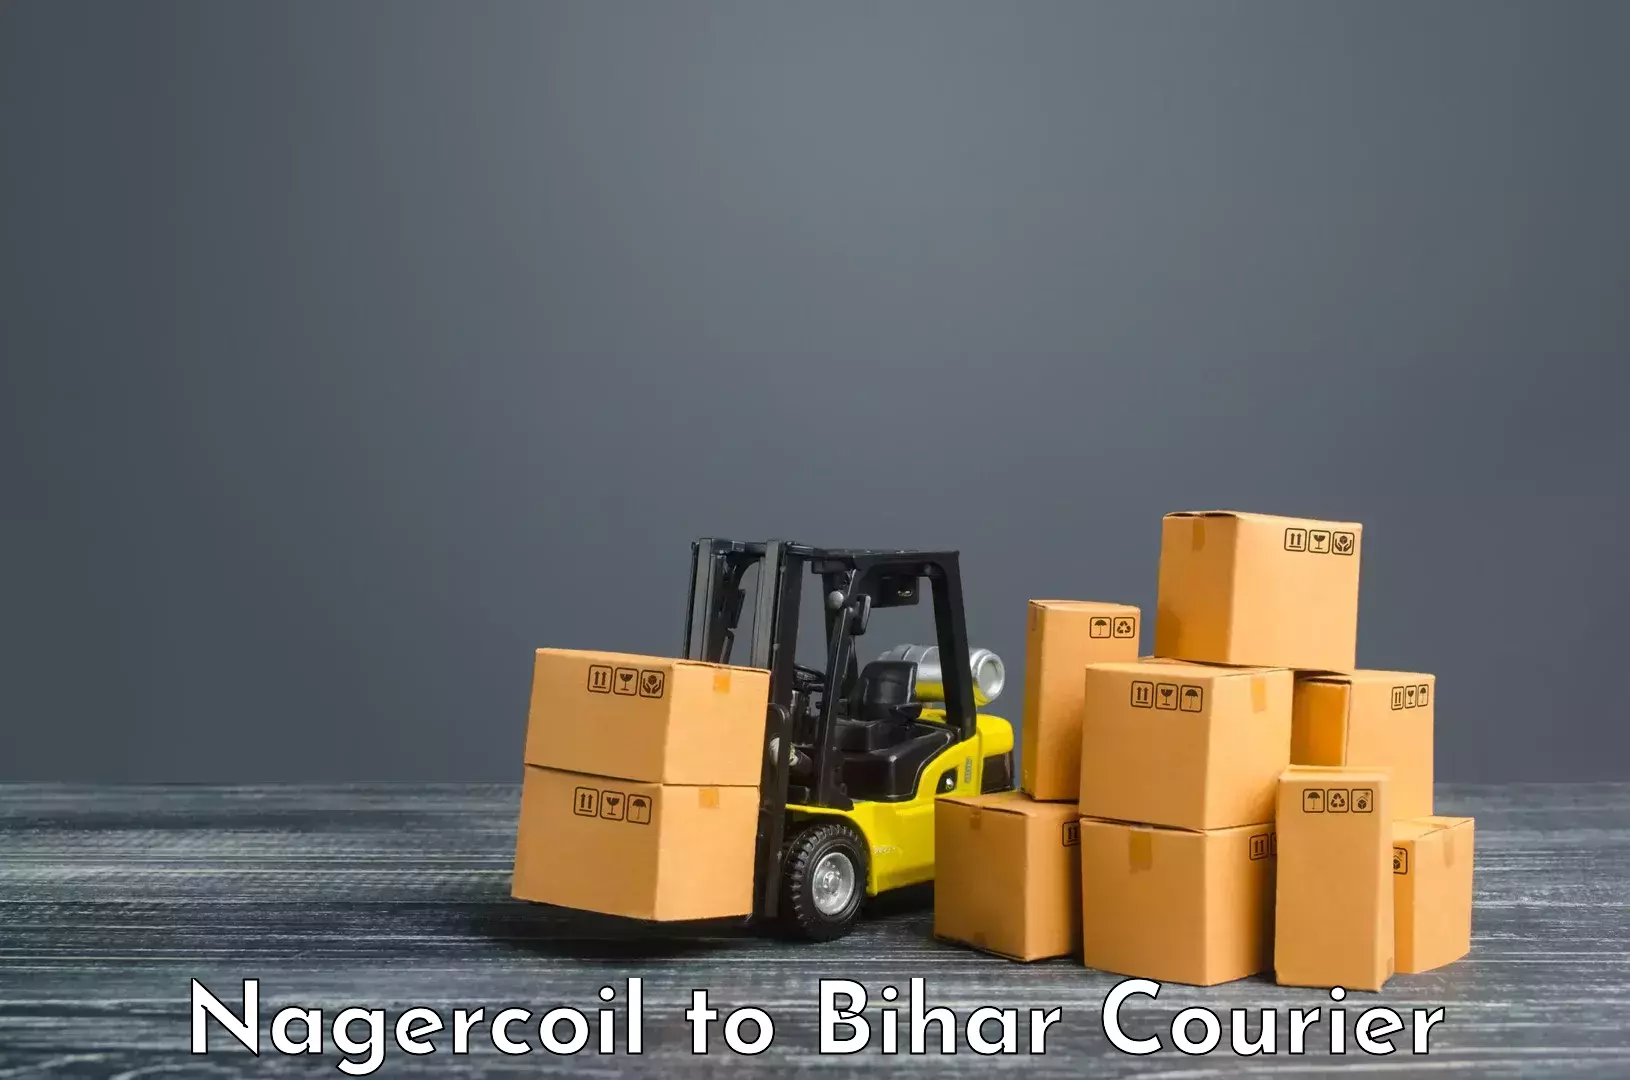 Flexible delivery scheduling Nagercoil to Bikramganj